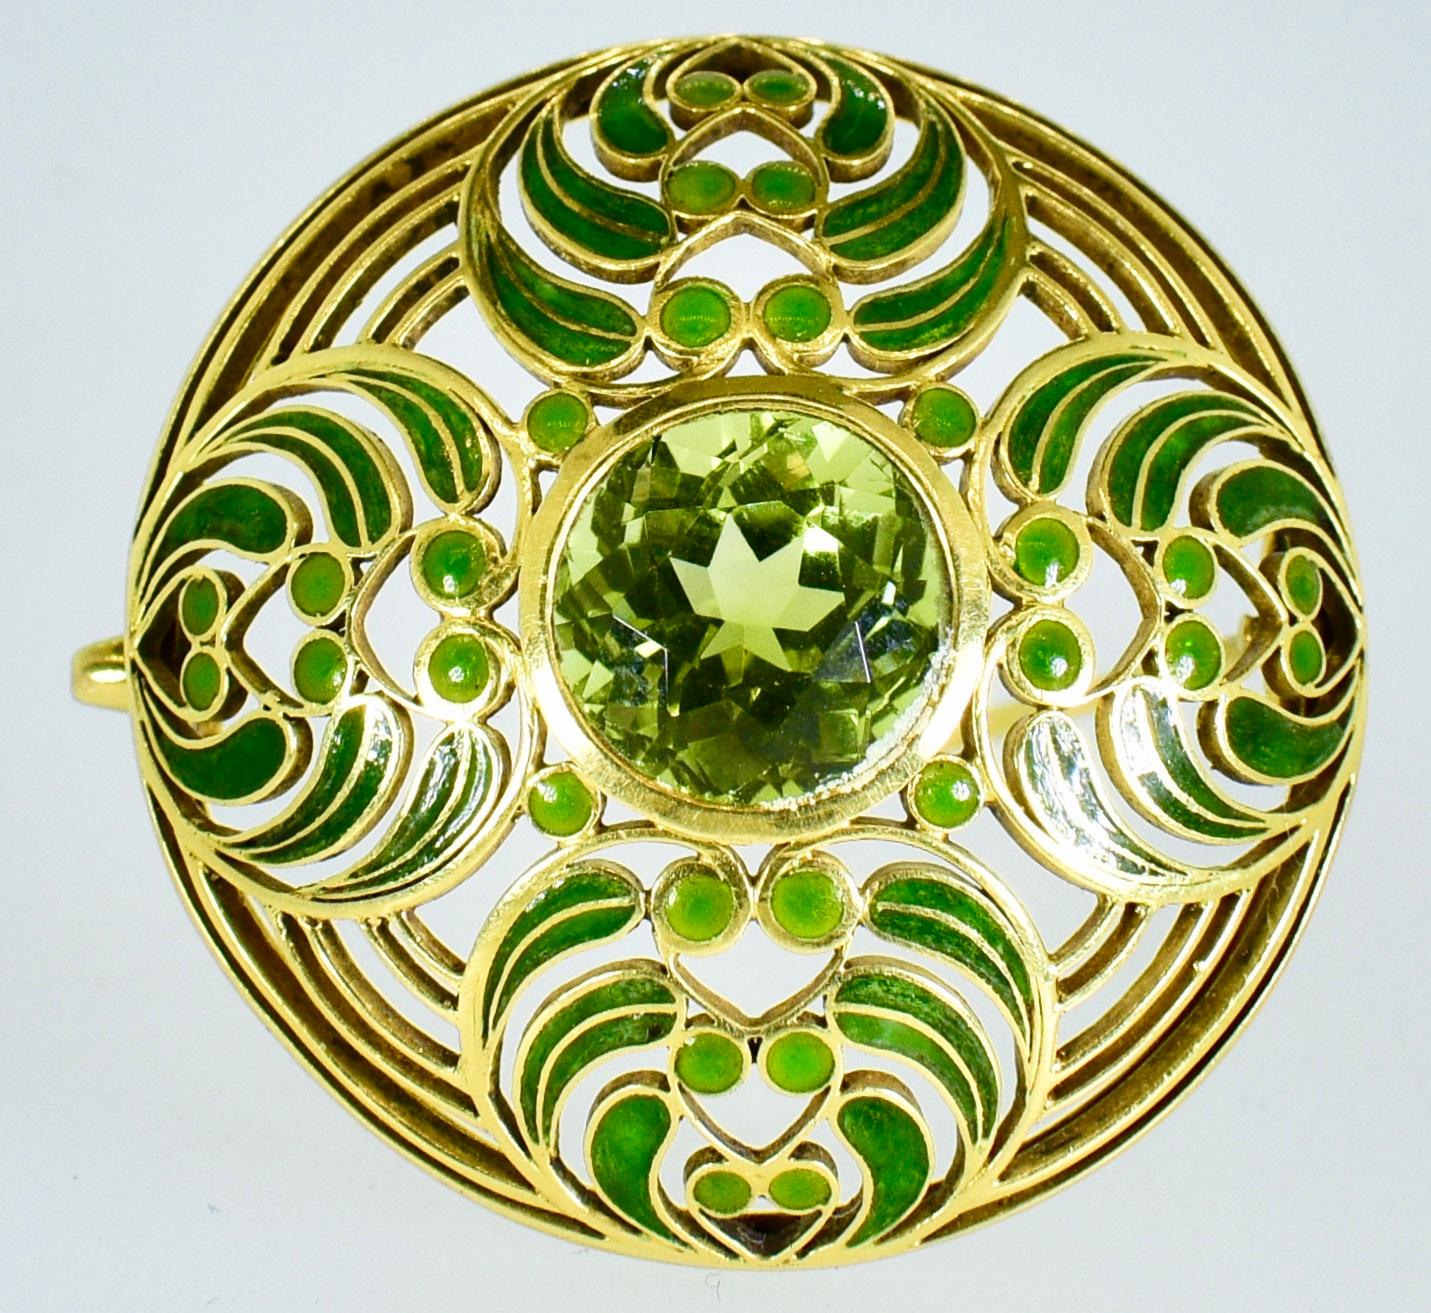 Women's or Men's L.C. Tiffany & Co. Enamel and Tourmaline Large Brooch, circa 1900